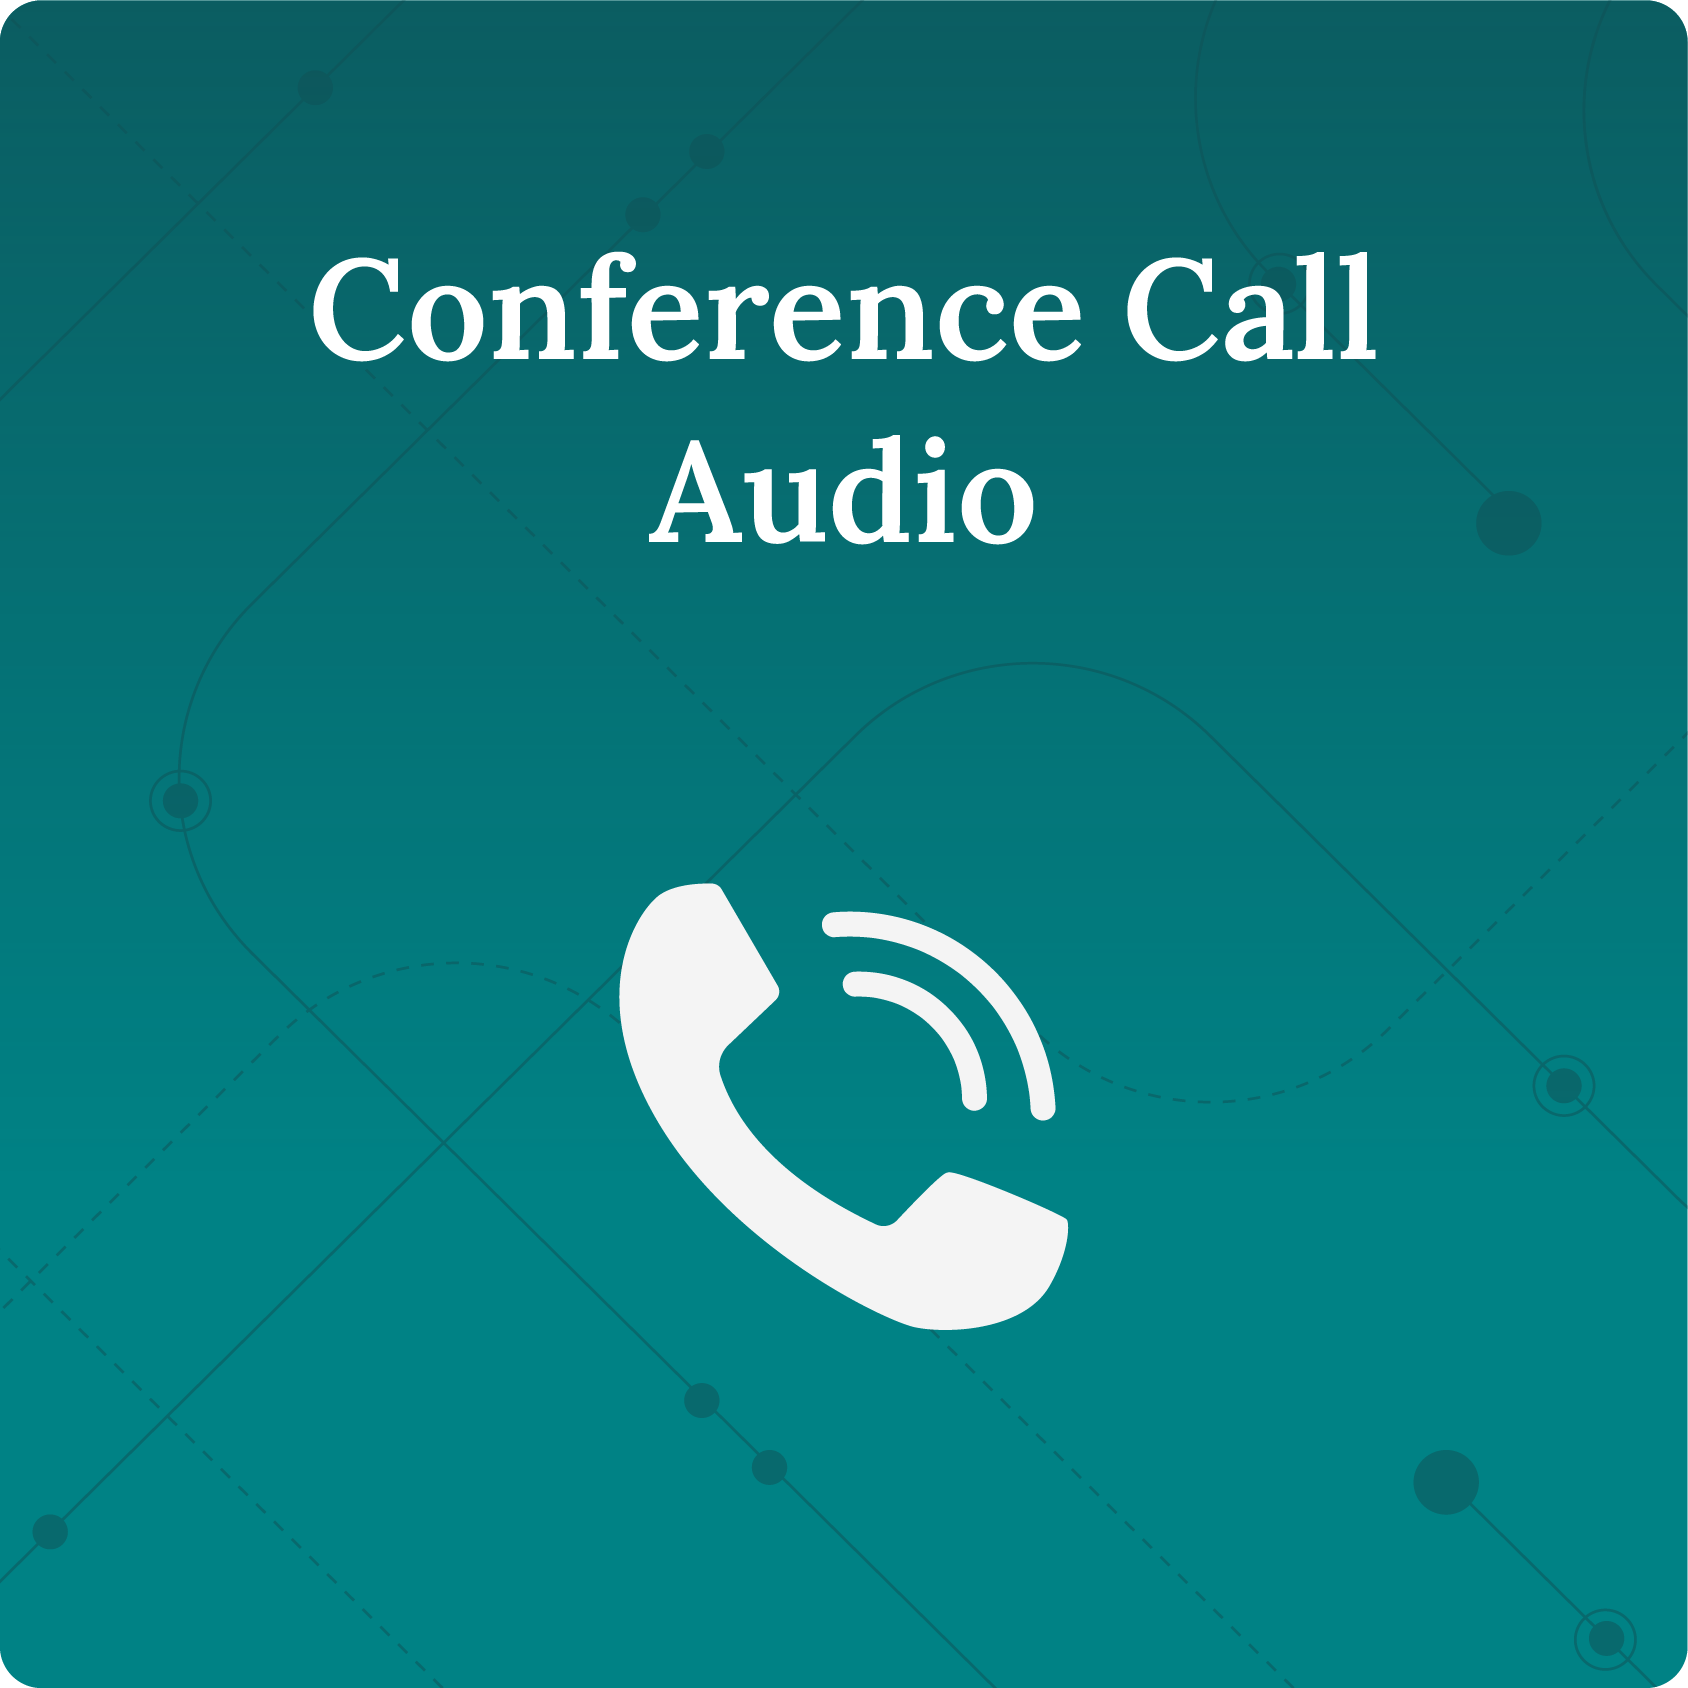 Conference Call Audio